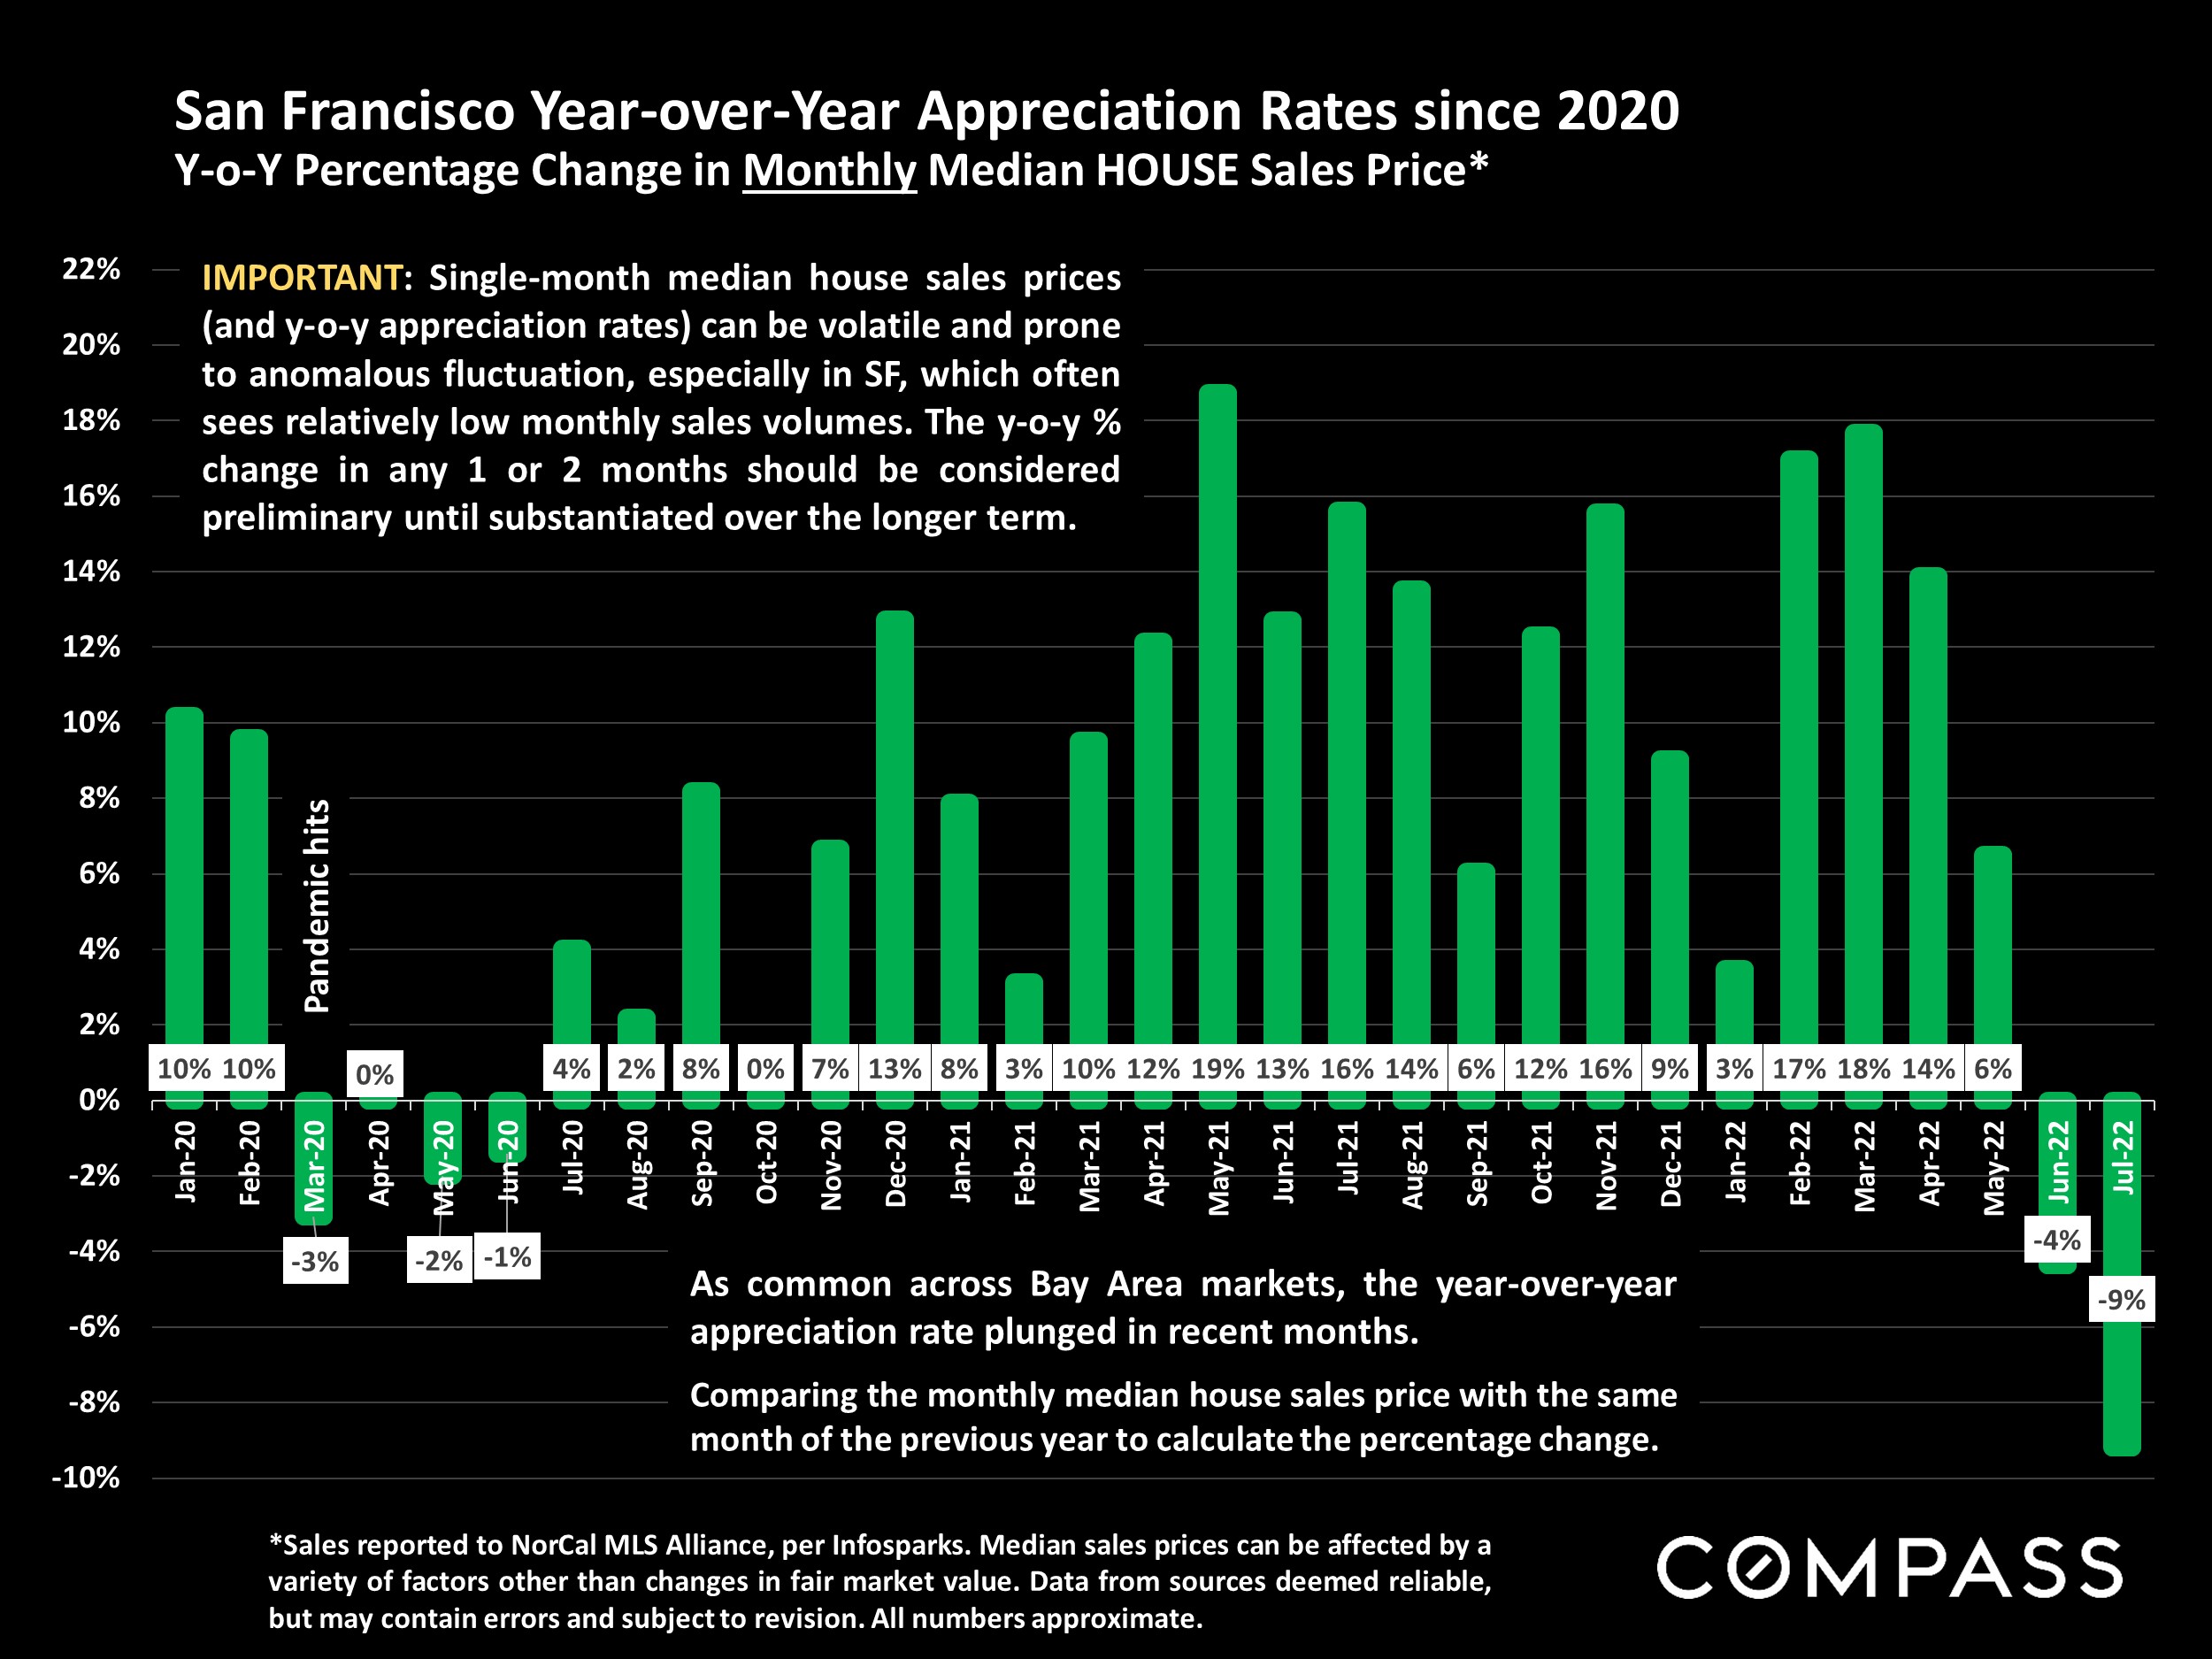 San Francisco Year-over-Year Appreciation Rates since 2020